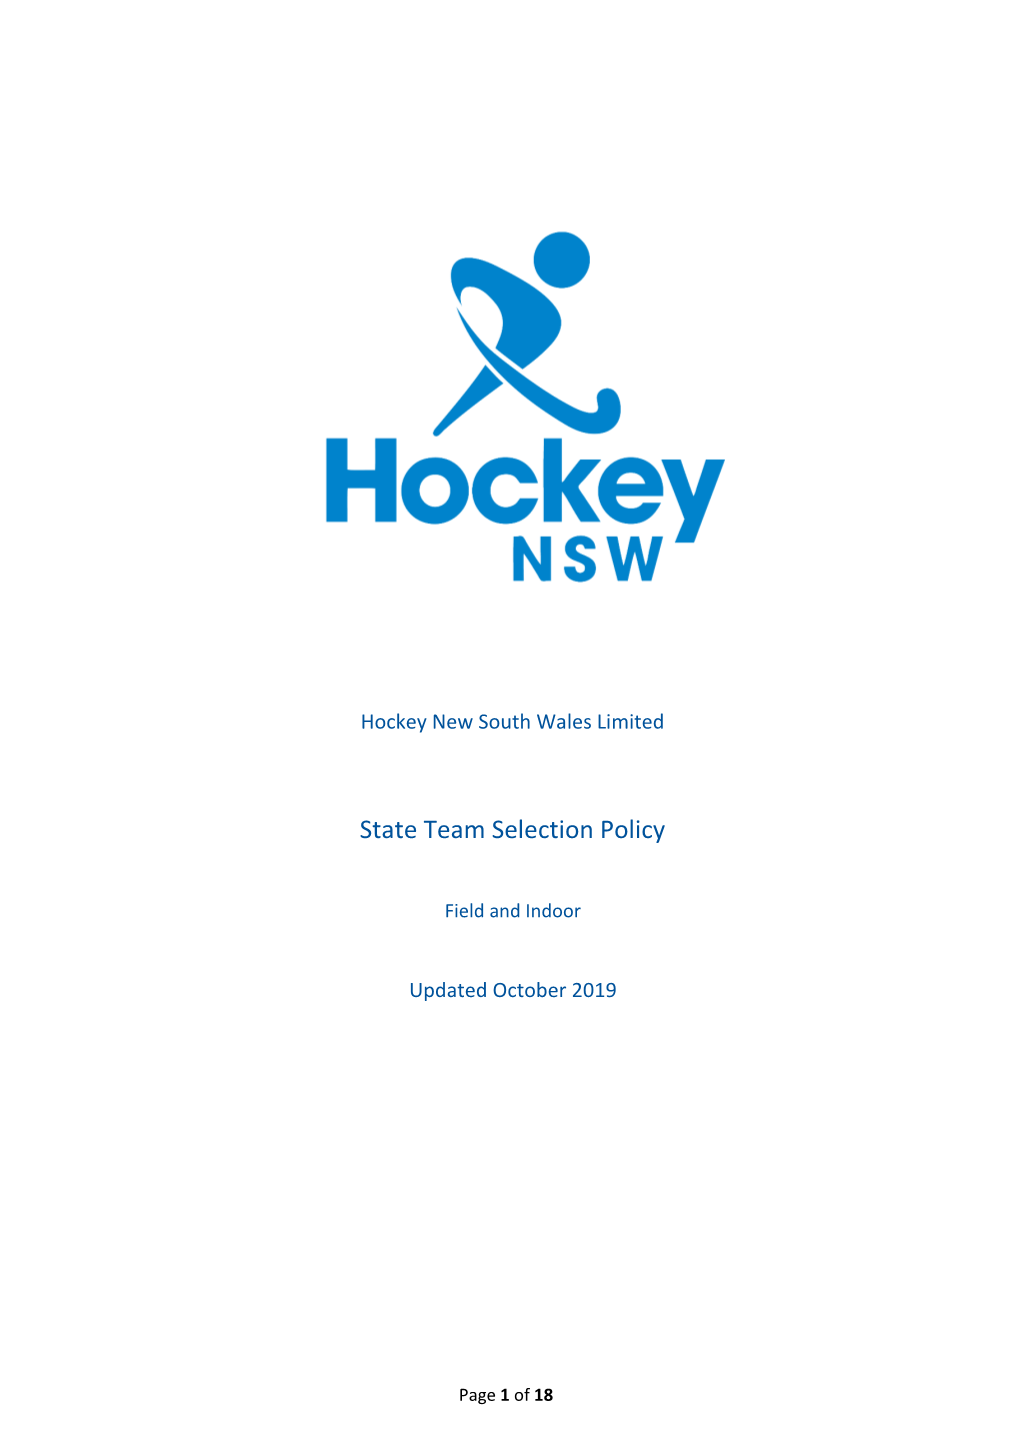 Hockey NSW State Team Selection Policy